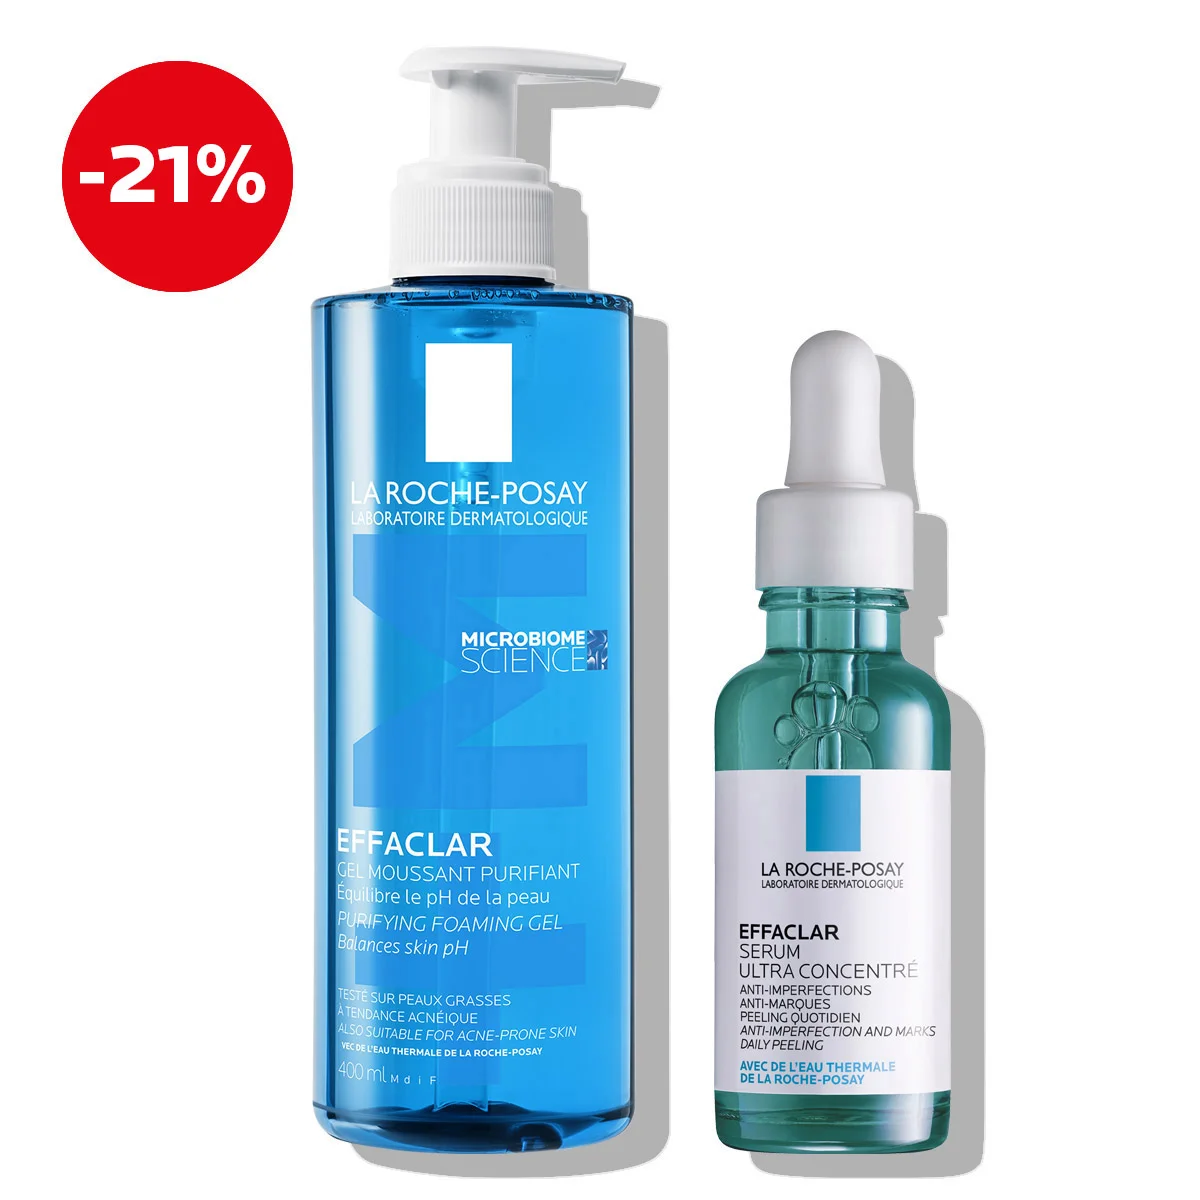 La Roche-Posay EFFACLAR Protocol for adult acne and irregularities (cleansing and care) (1)